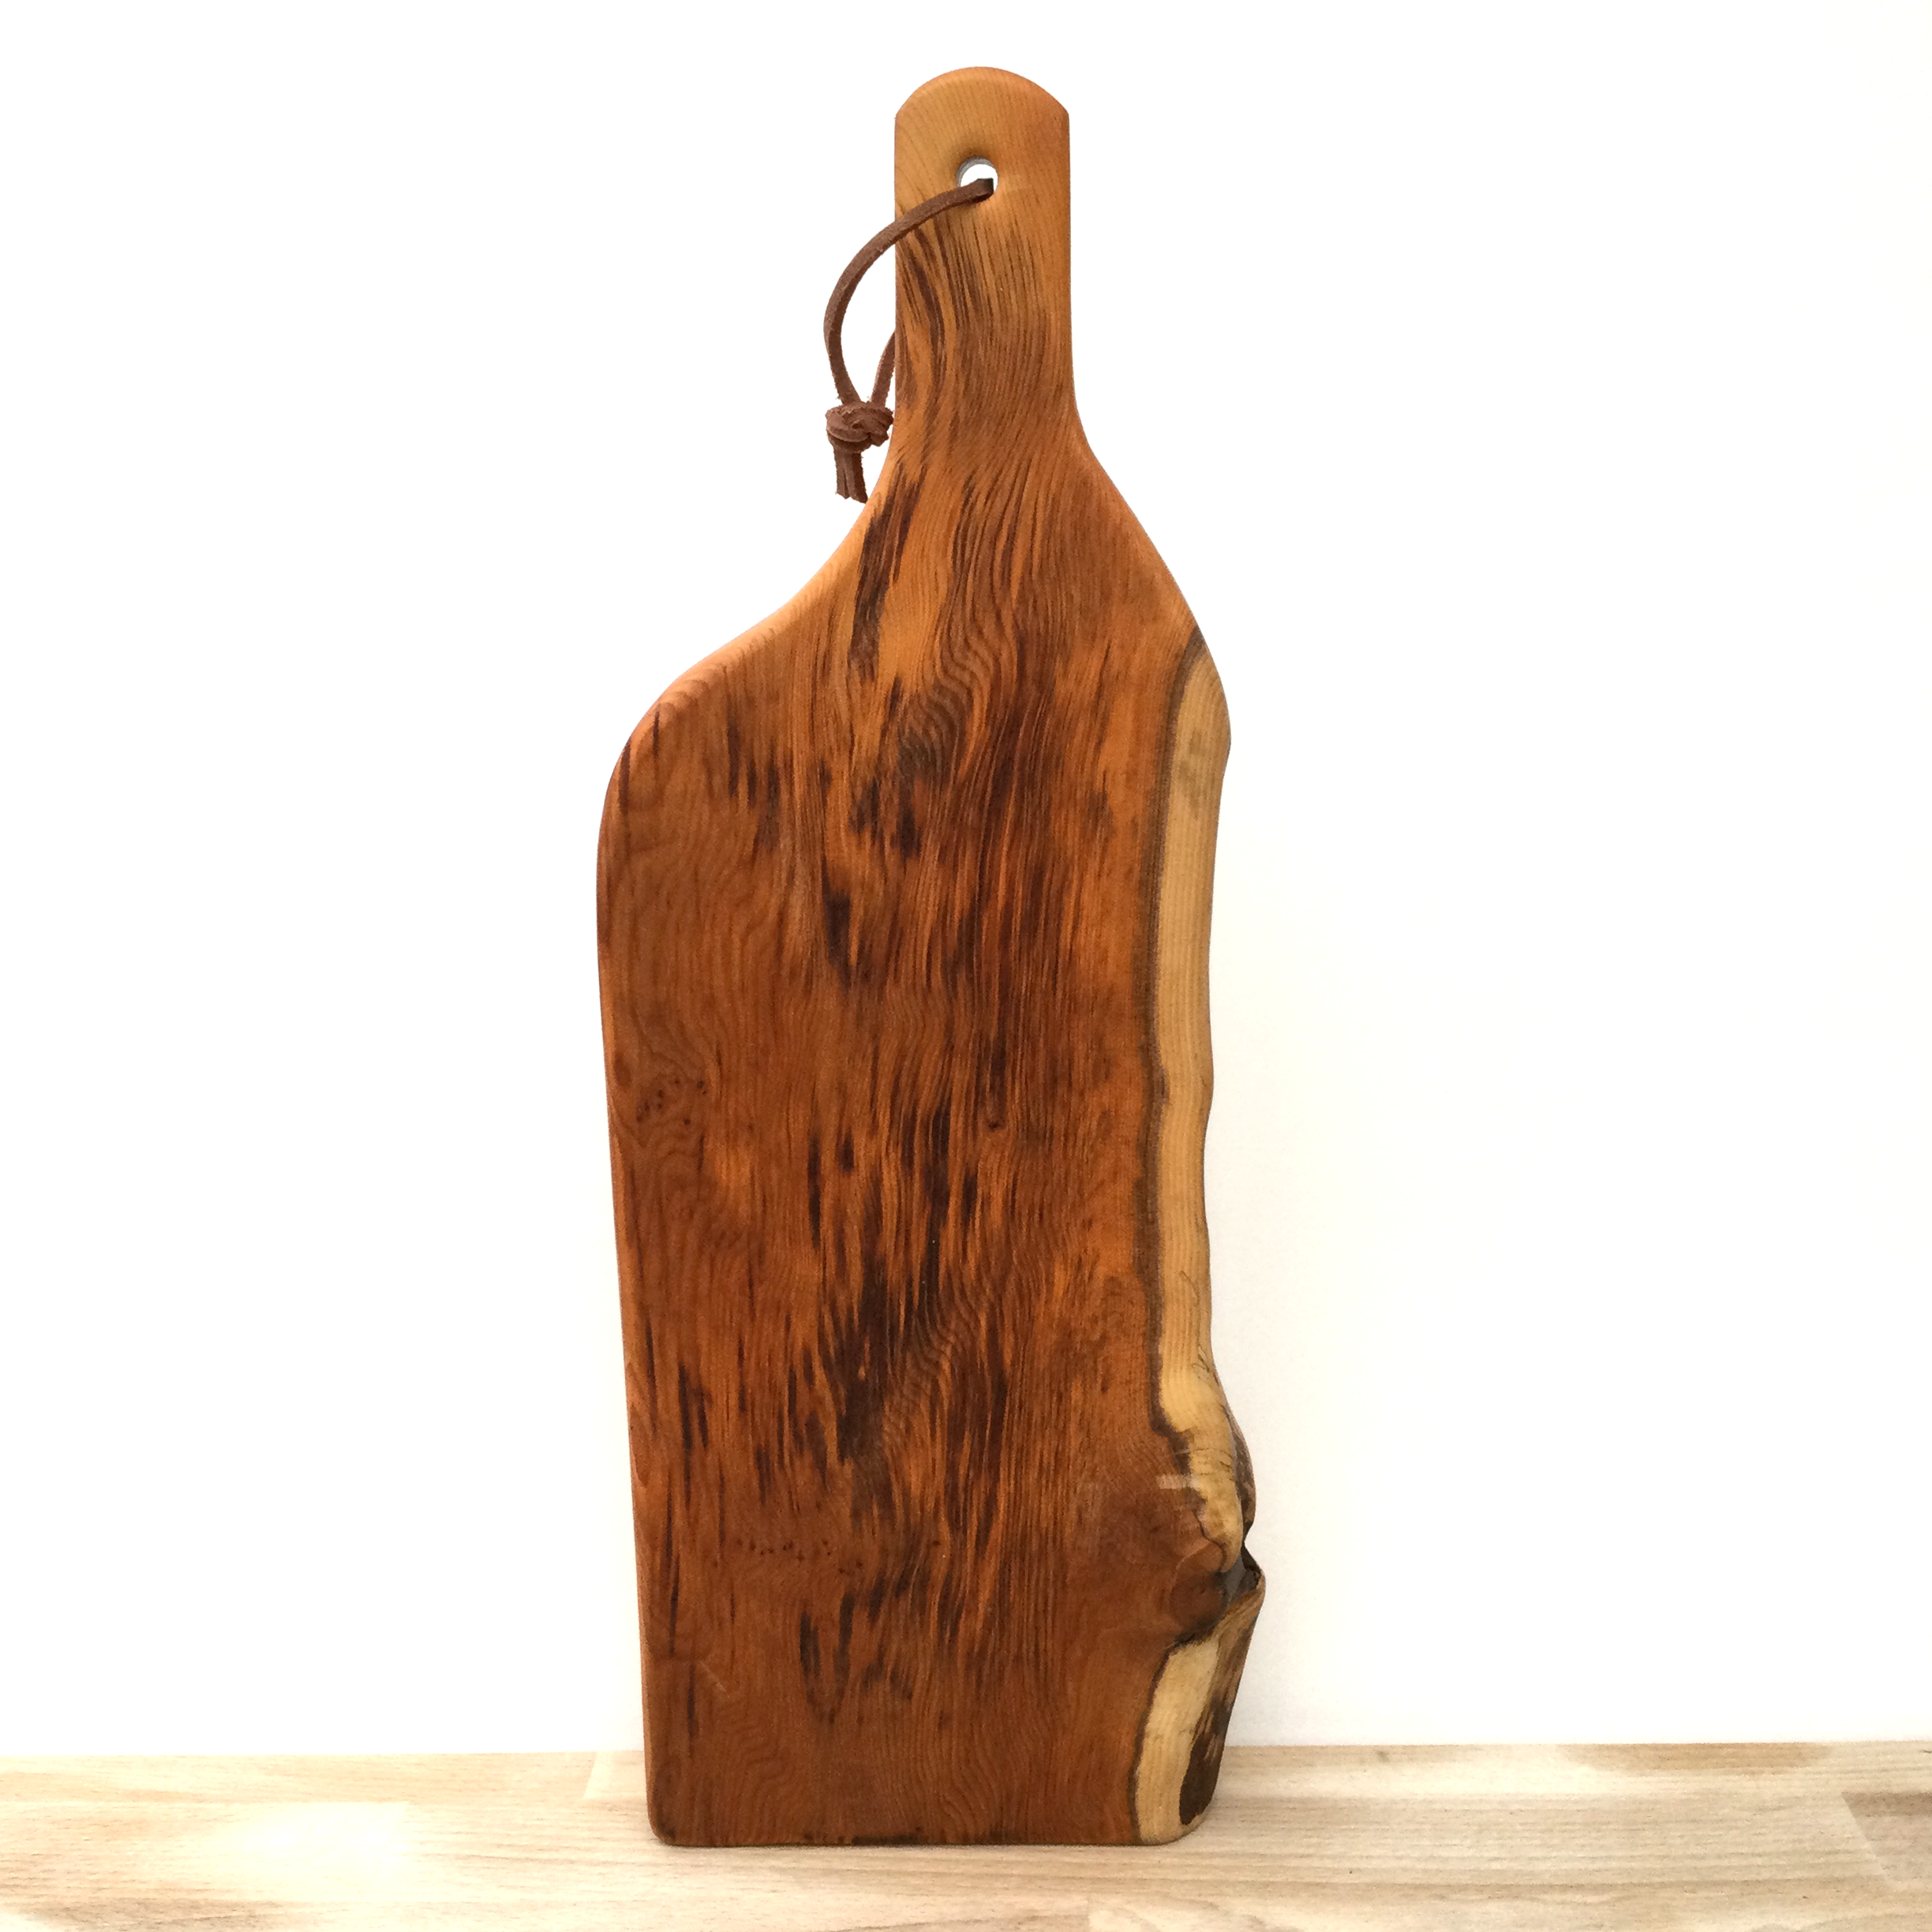 Large character board - Yew